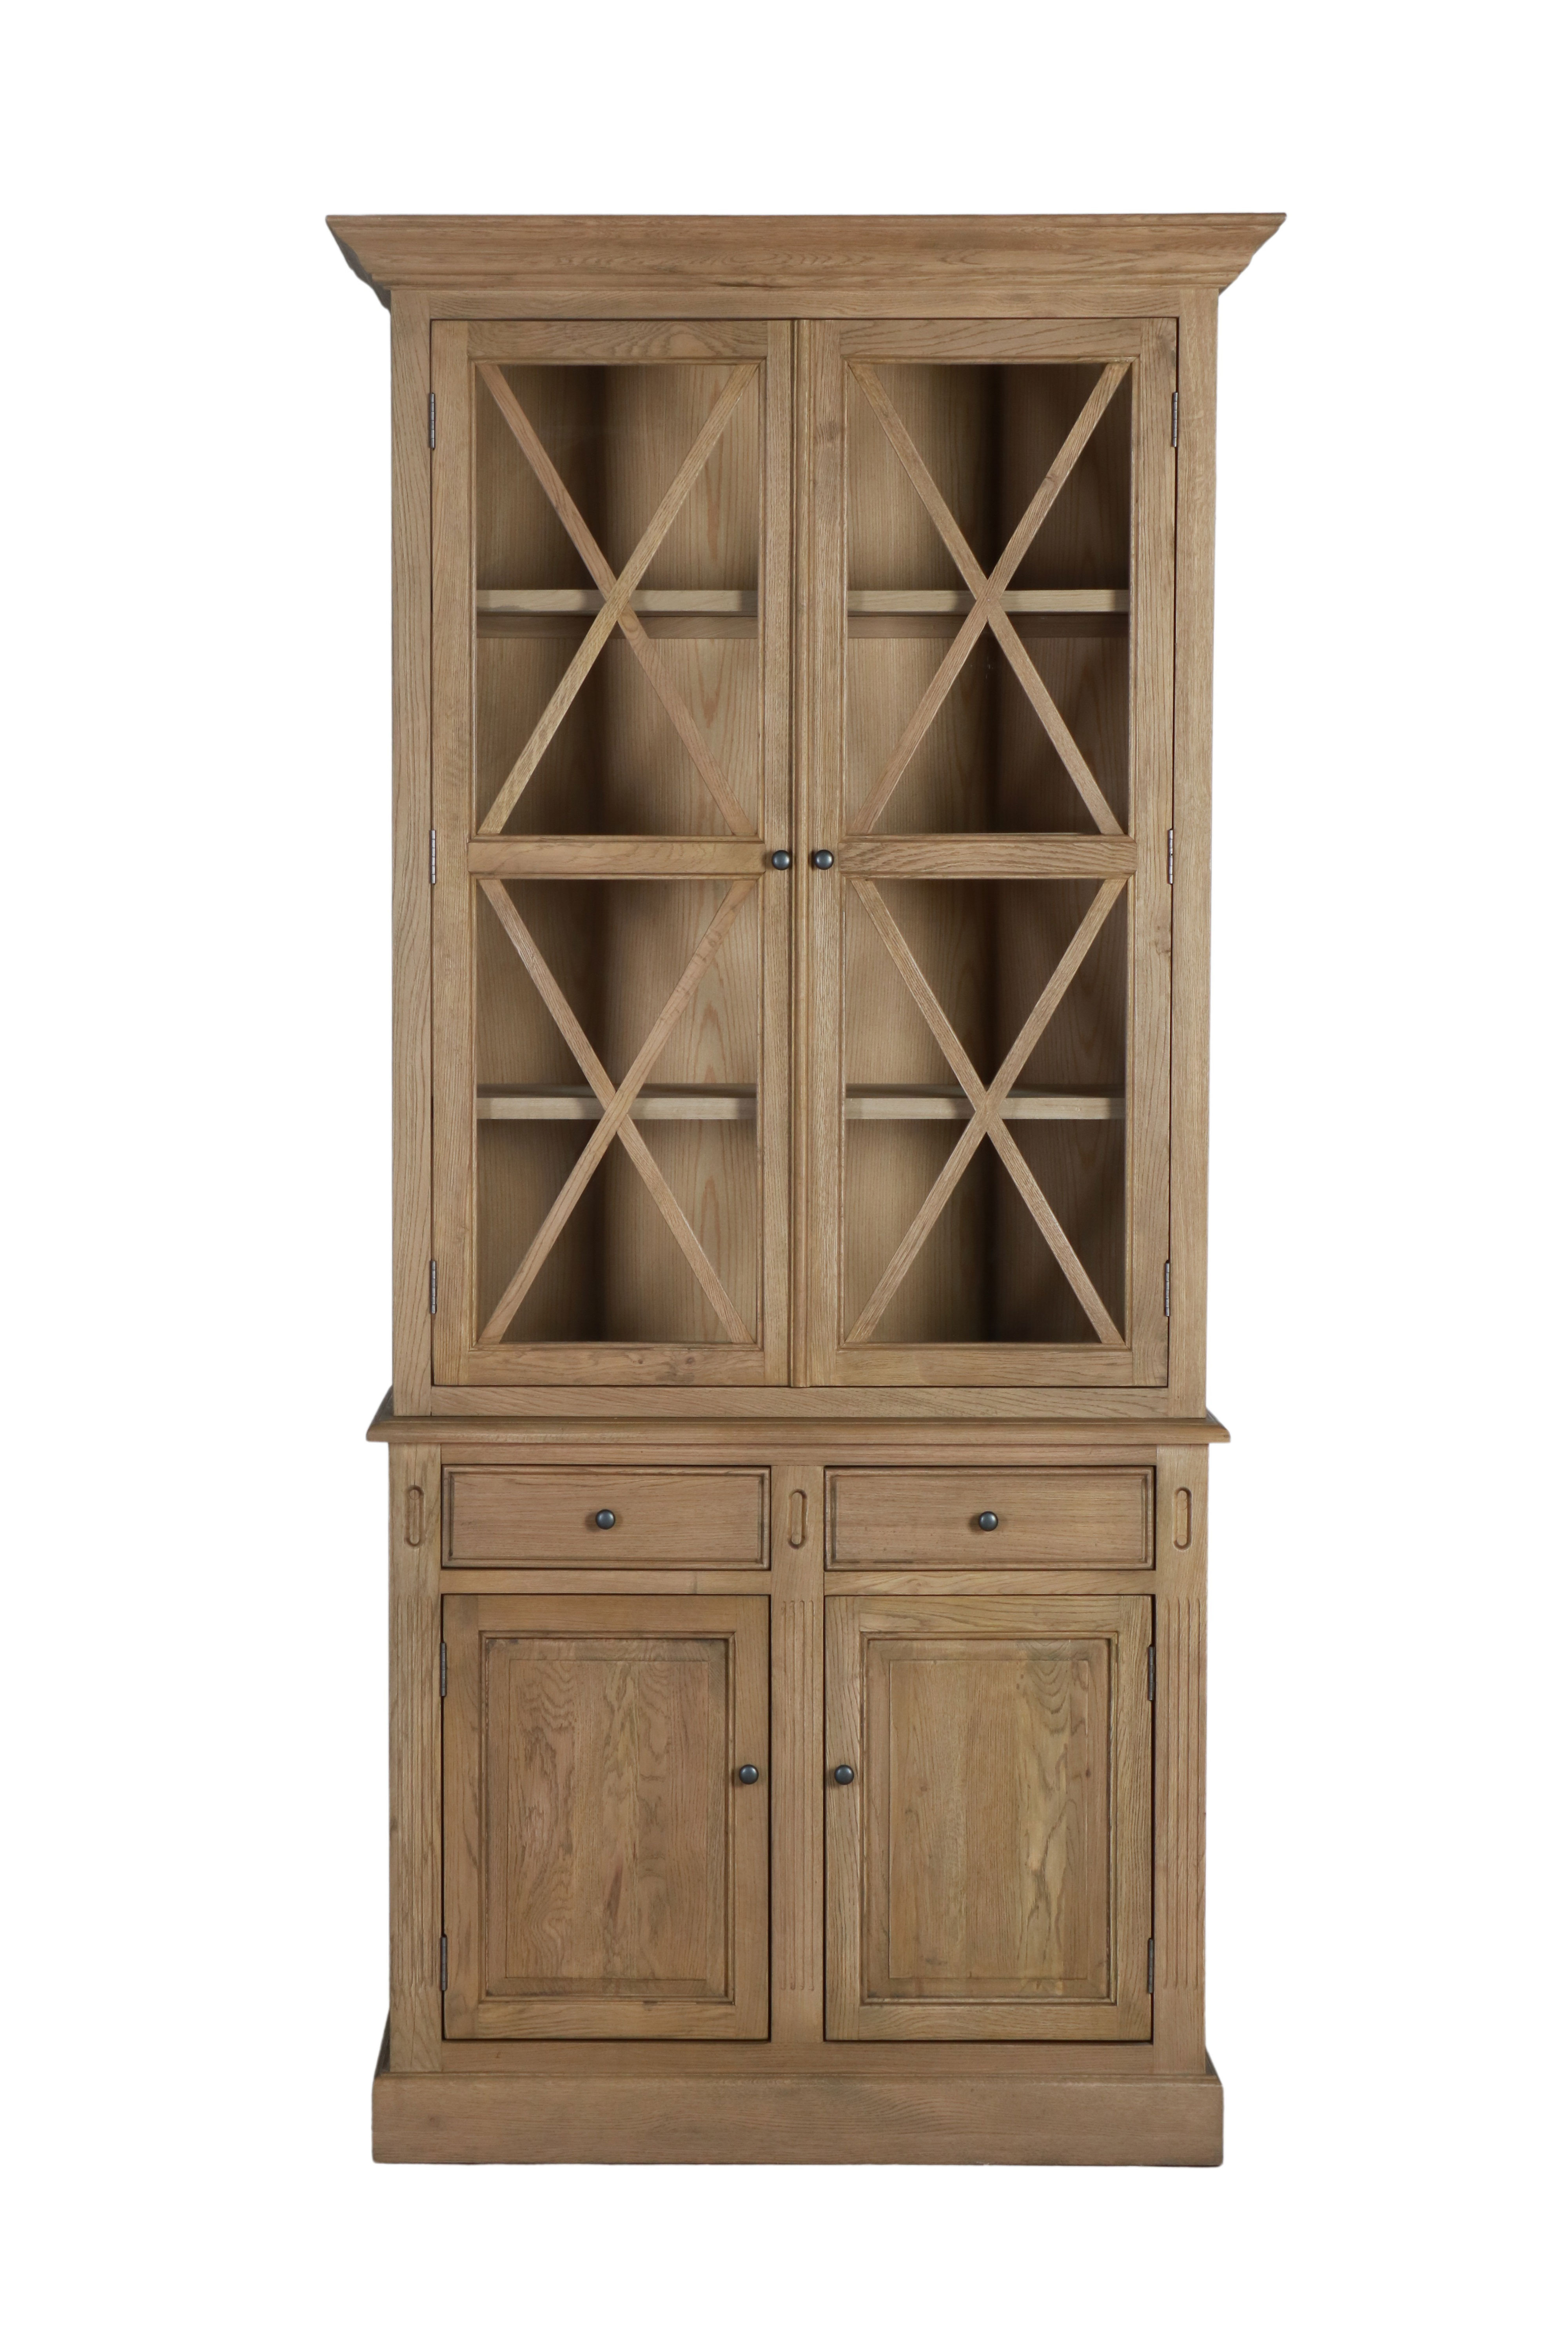 Oak bookcase with doors and drawers